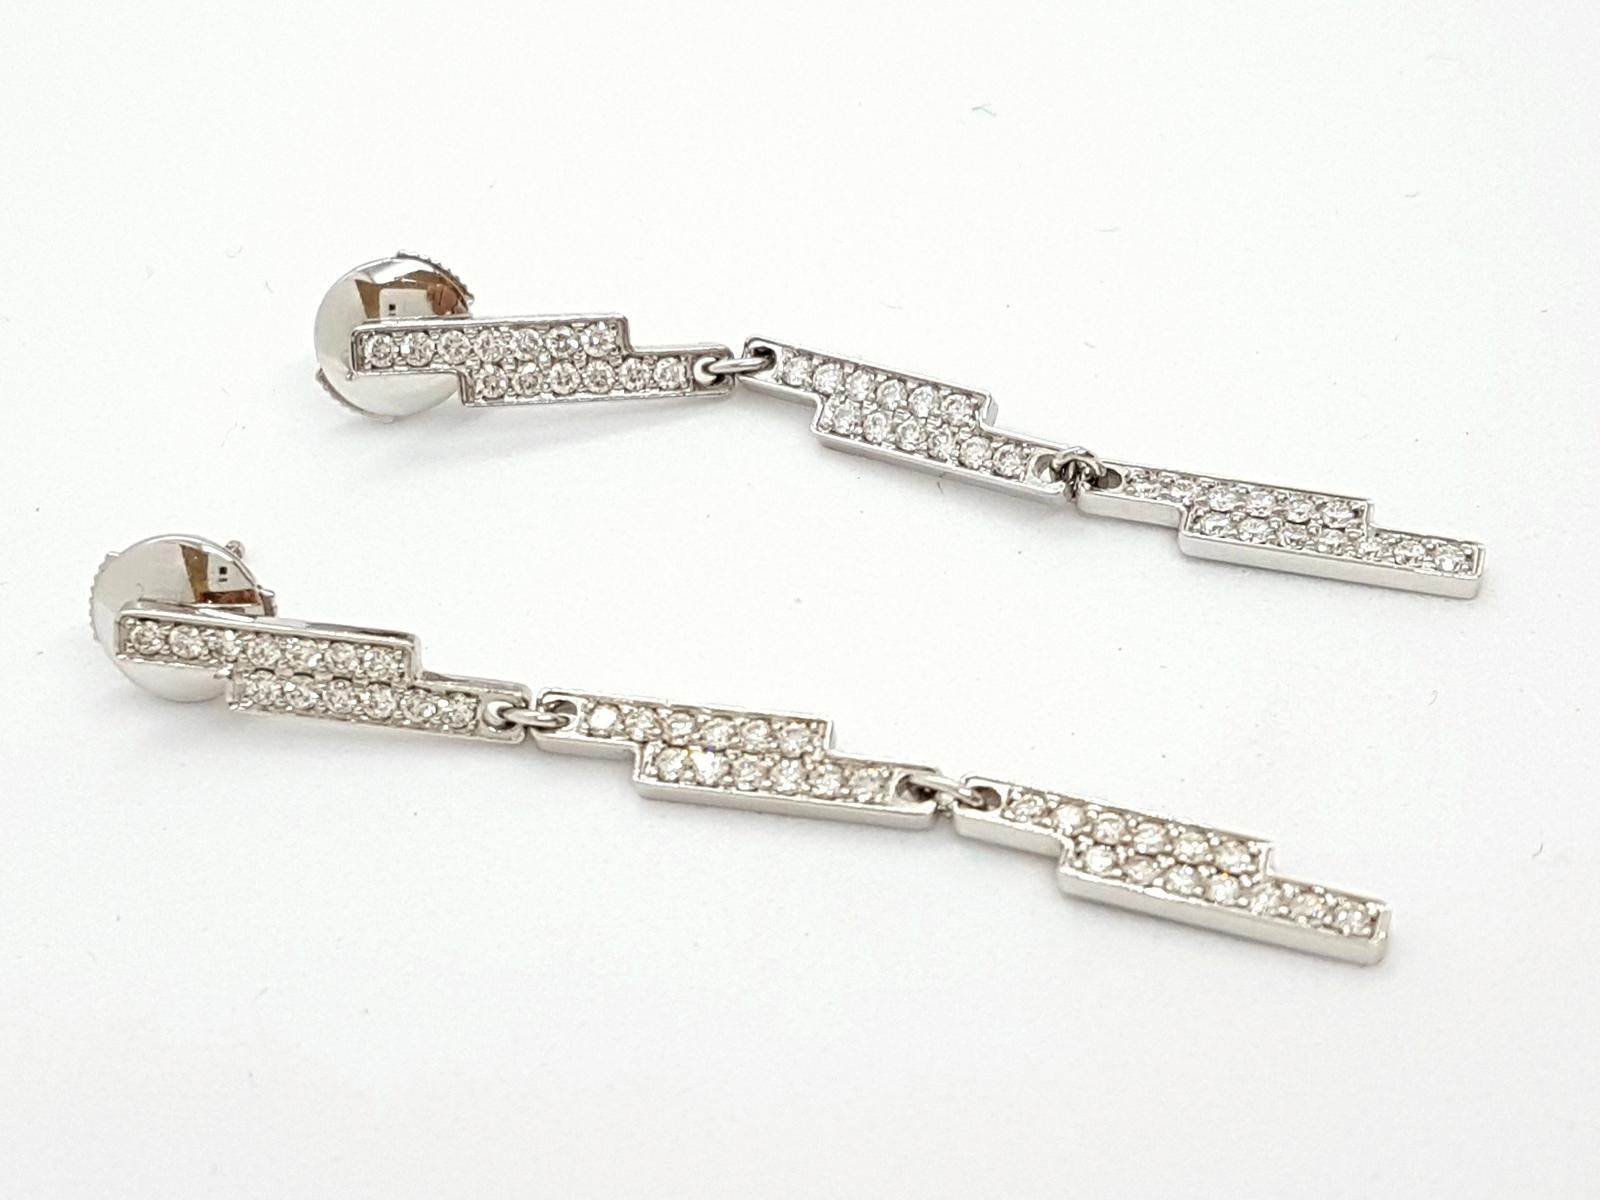 Earrings signed La Maison Van Dinh.
Seventies collection
18k white gold
Paved with 76 brilliant cut diamonds G- VS for a total of 0.95 carat. weight: 5.84 g.
length 5.2 cm. width 0.4 cm. Mint. punched
